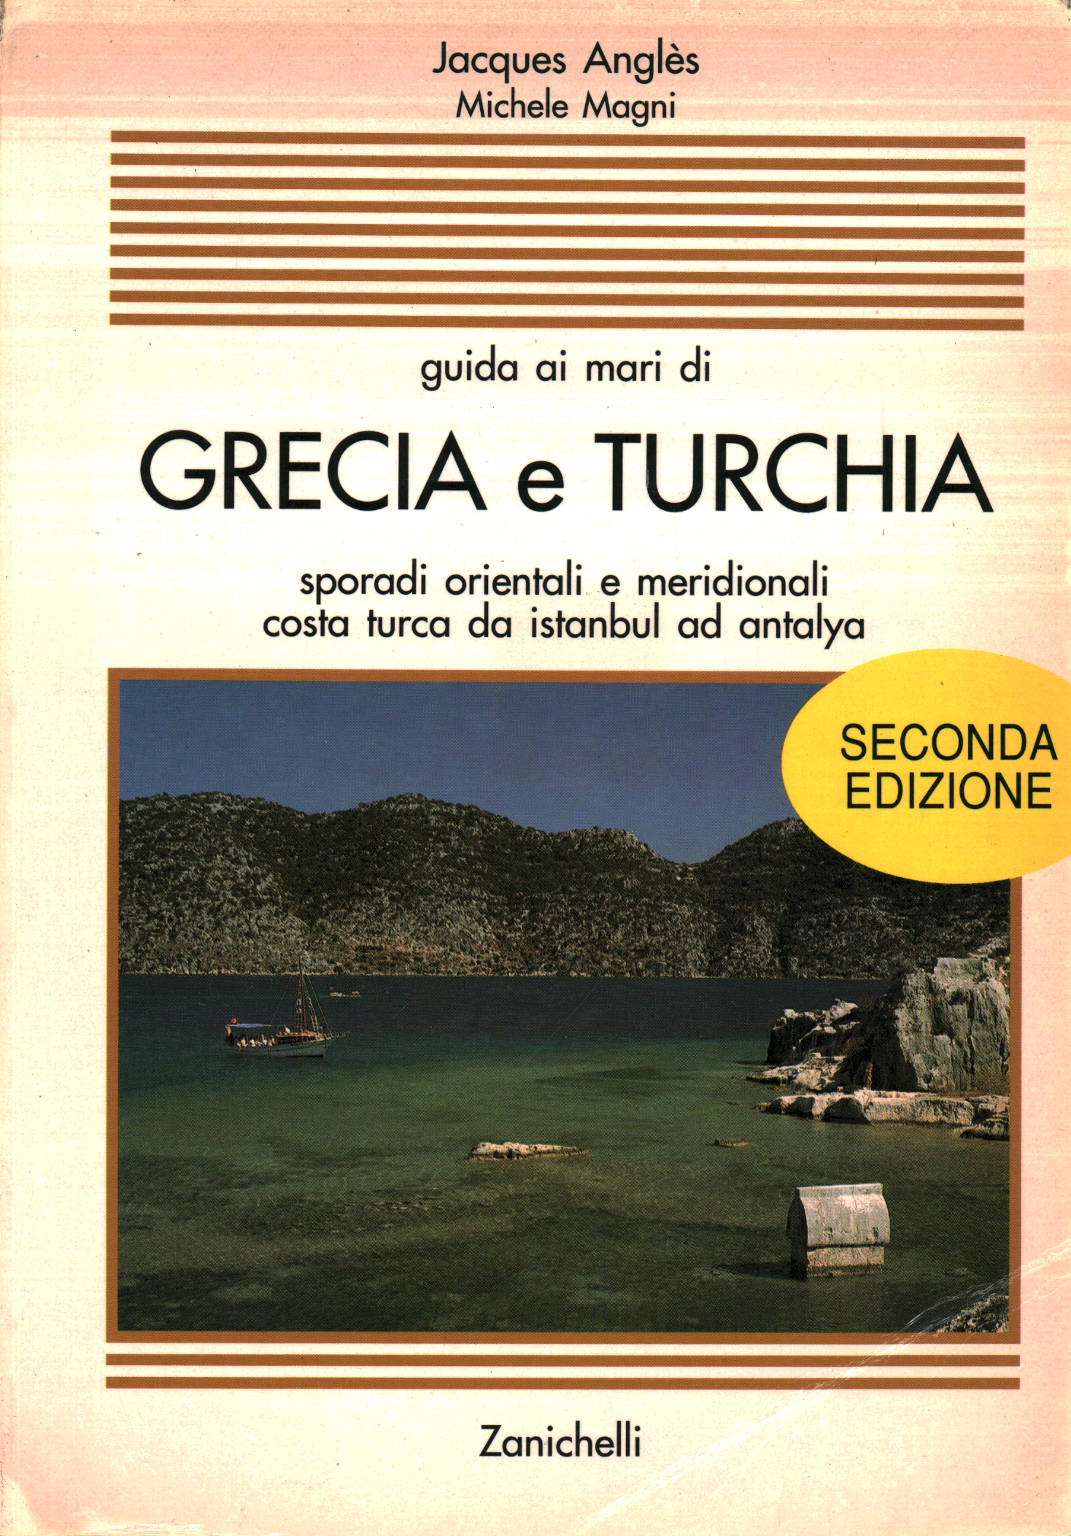 Guide to the seas of Greece and Turkey, Jacques Anglès Michele Magni